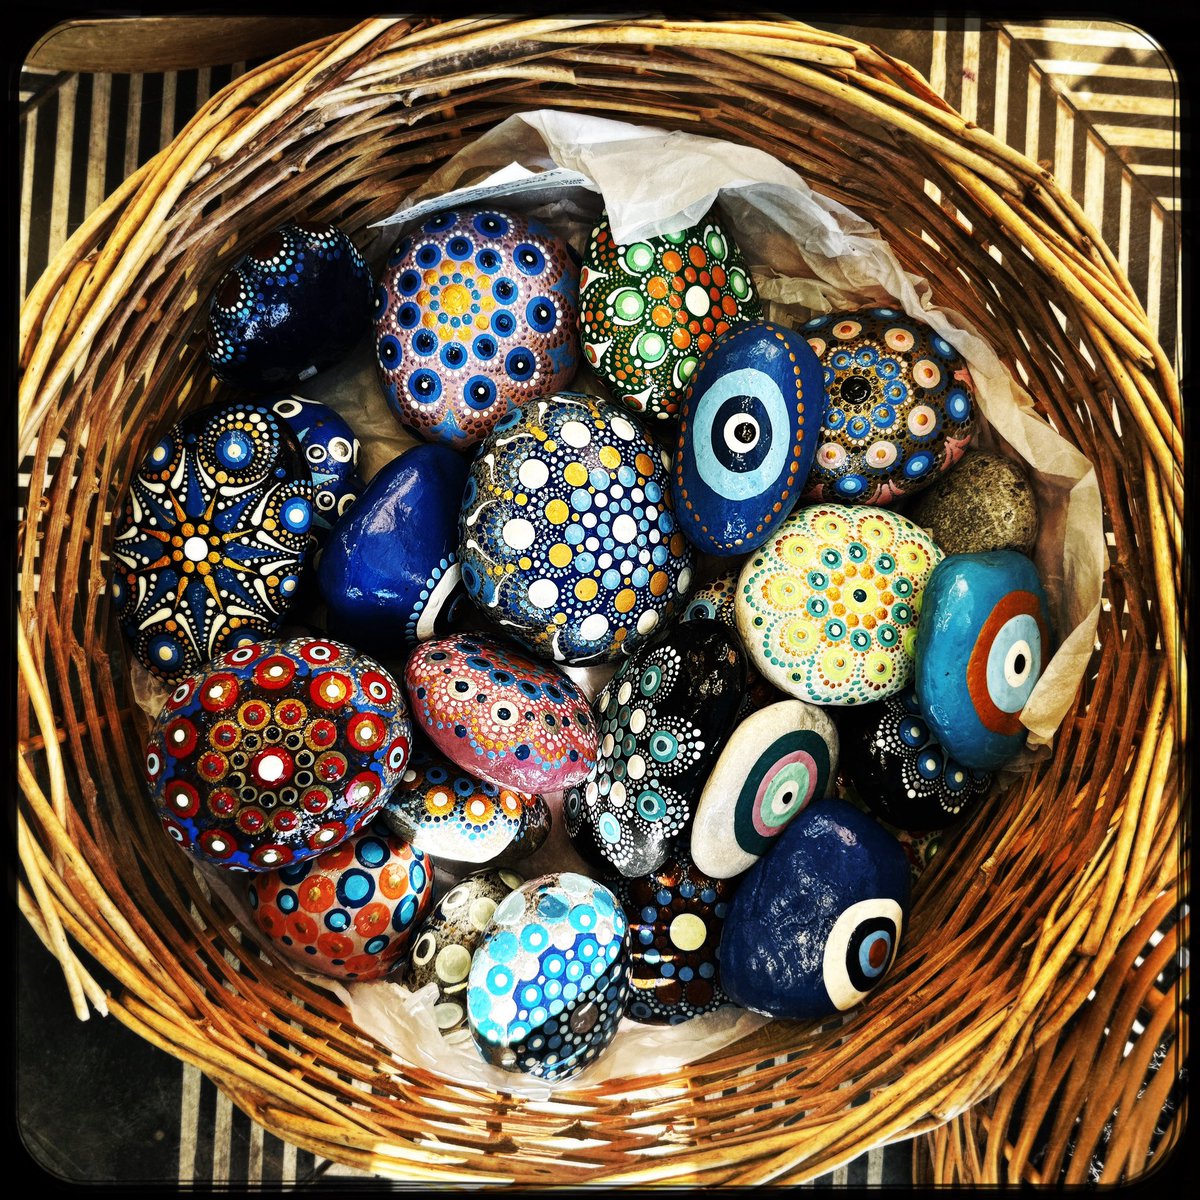 Lovely to see some old followers re-finding me - and new followers too. Here’s a basket of beautiful painted pebbles by way of thanks! I’m in Thessaloniki, about to start filming a new series for @Channel4 - involving ancient civilisation + trains of course! I’ll keep you posted.